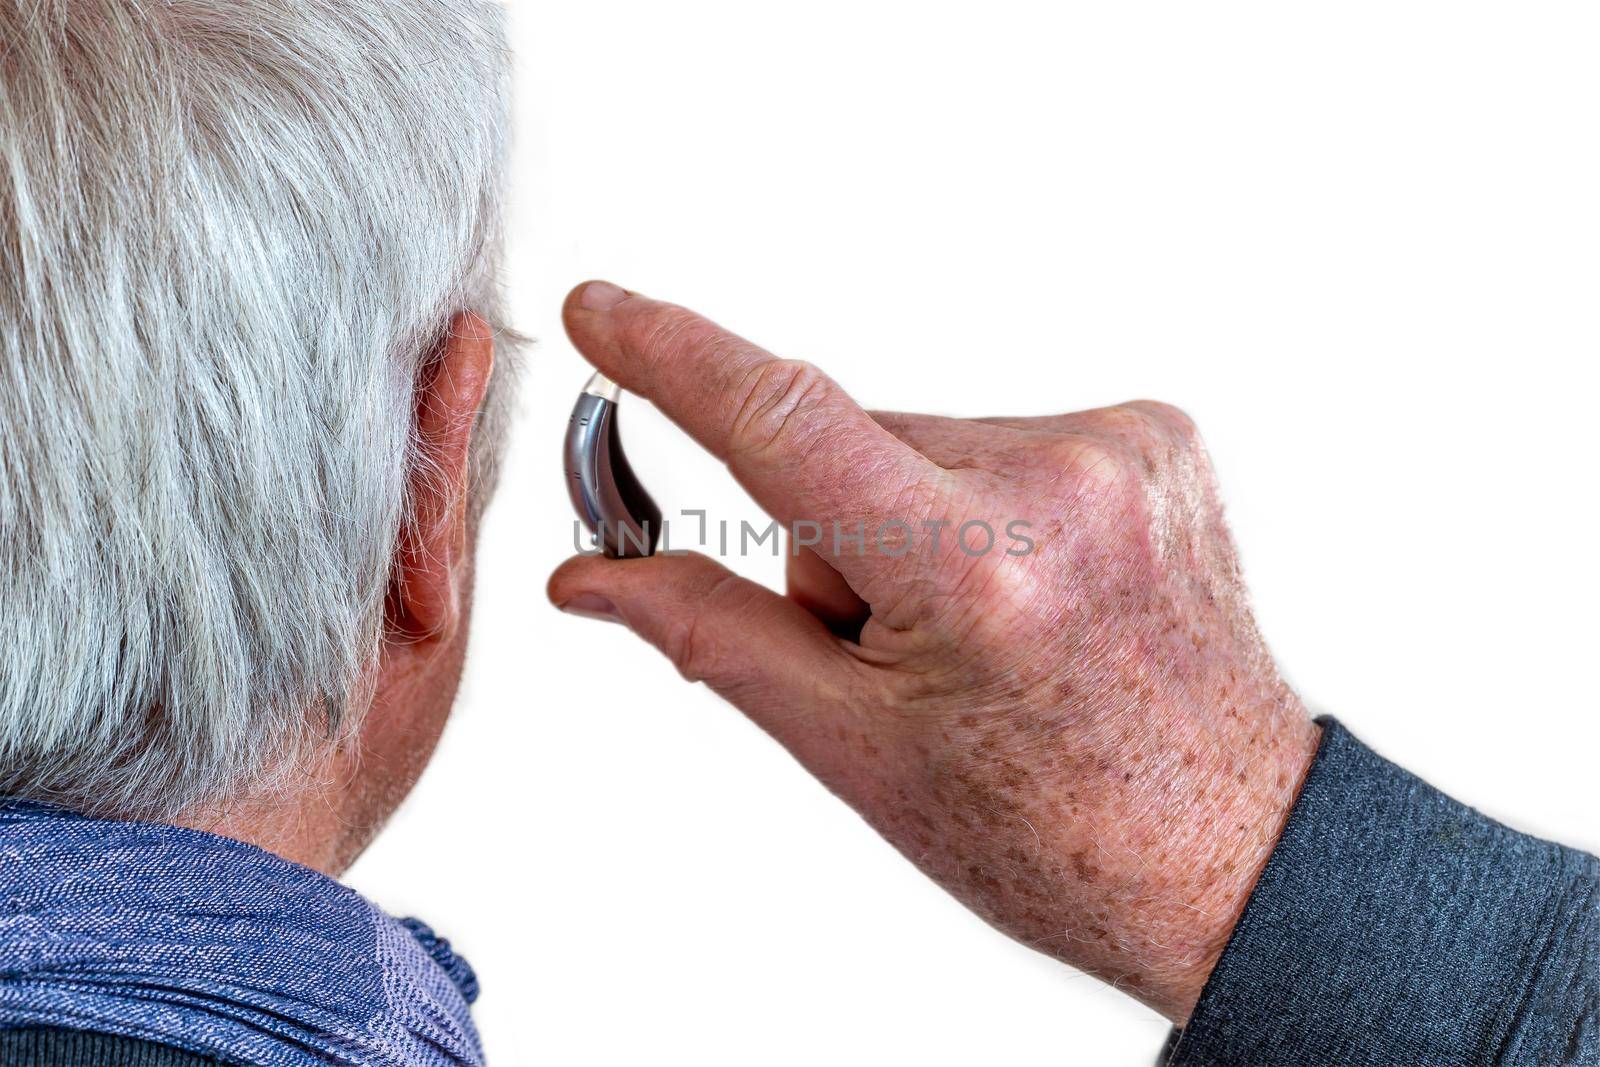 American plan on the installation of a hearing aid of a senior with white cheuveux rear view.